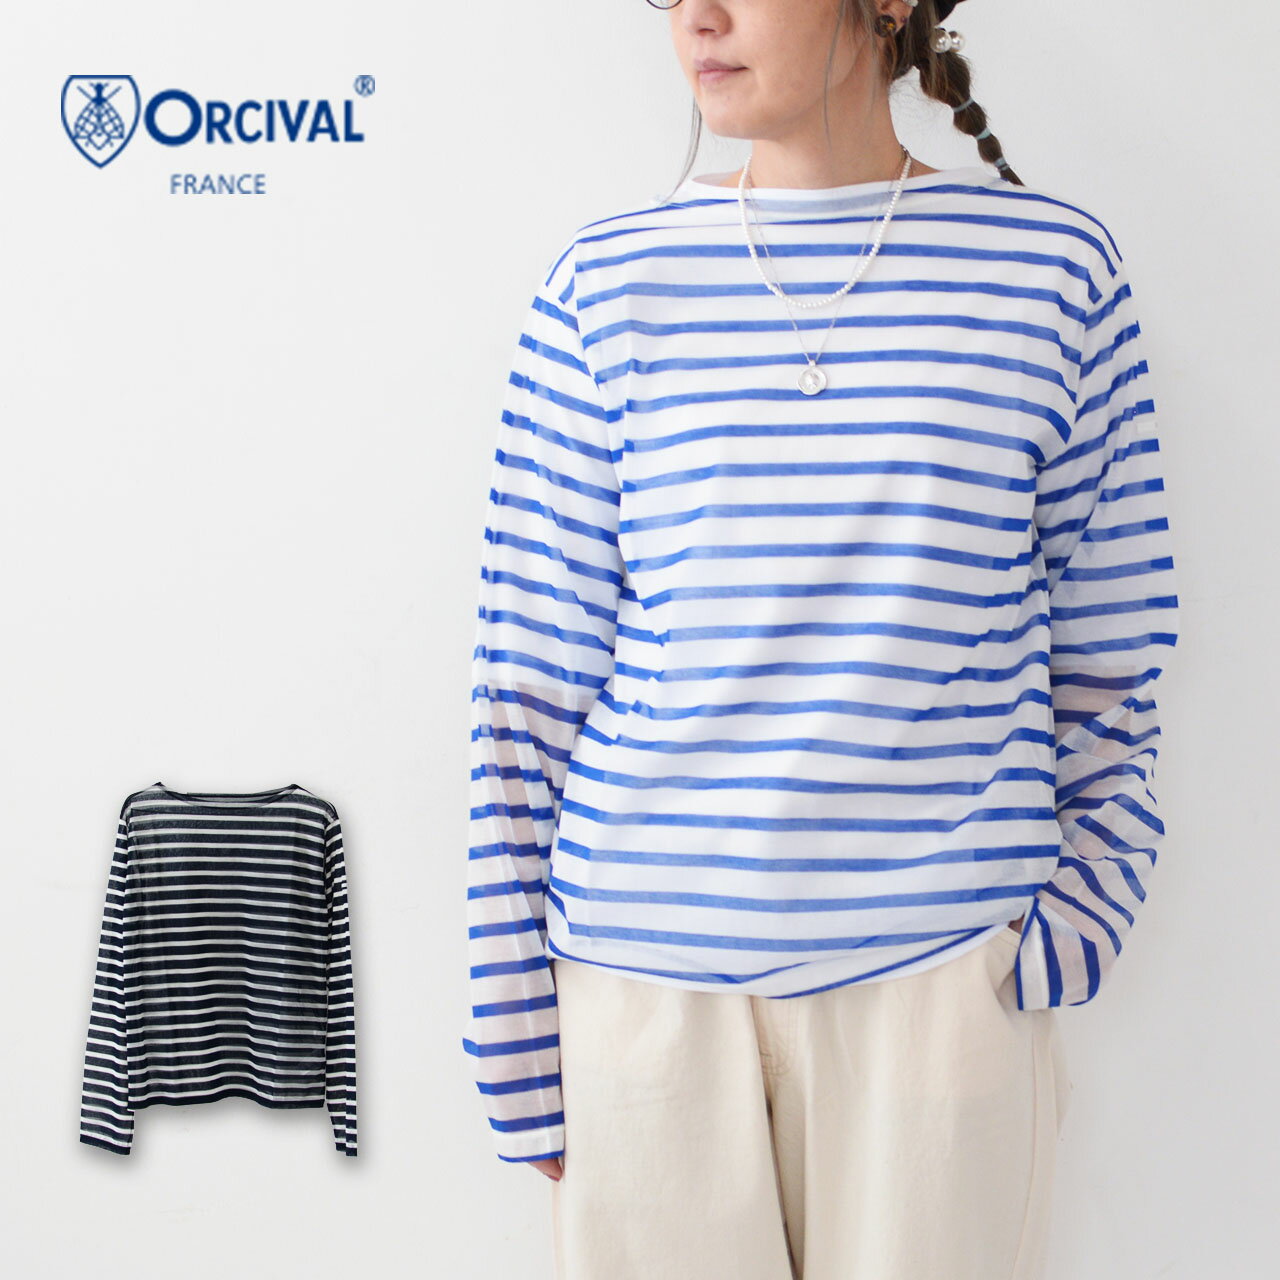 ORCIVAL  W SEE THROUGH BOAT NECK L/S CUT AND SEWN-BORDER-  シースルー ボートネック長袖カットソー・ボーダー・シアー素材・ボートネック・LADY'S 